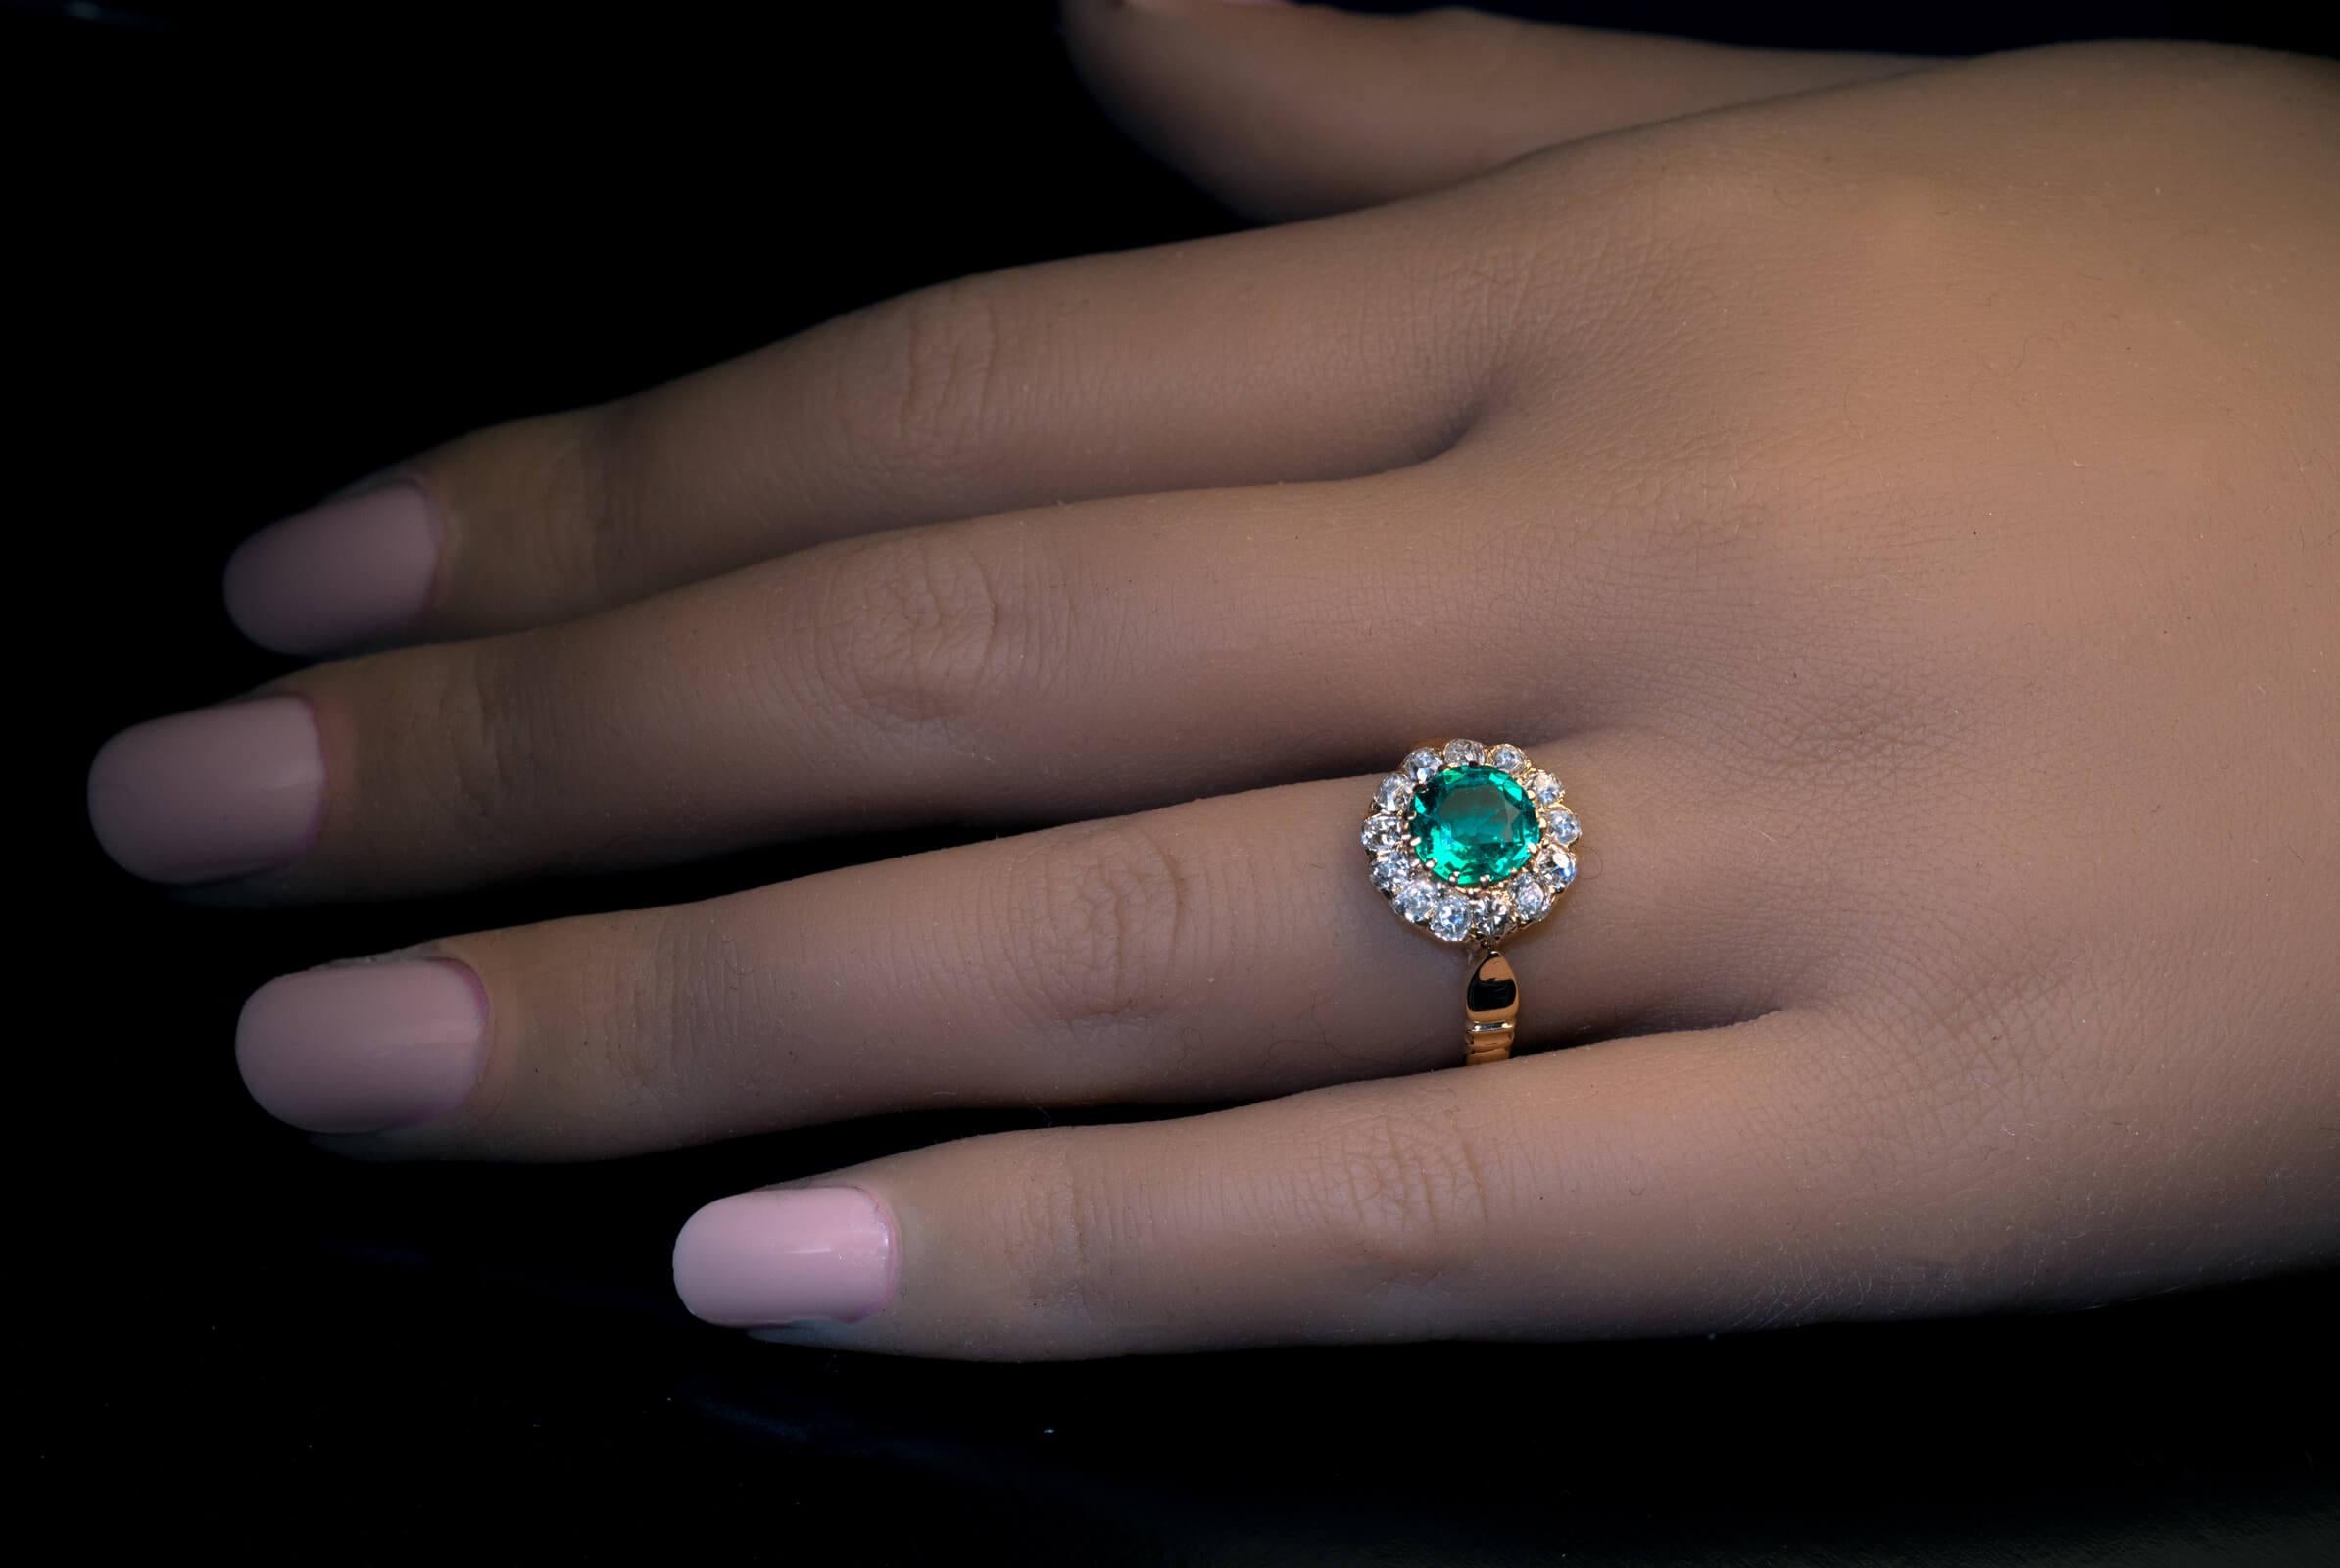 Circa 1900  This classic antique 18K gold cluster ring is centered with an excellent bluish green 1.09 ct Colombian emerald surrounded by bright white old mine cut diamonds (G-H color, SI clarity). The round cut emerald is eye clean (very rare for